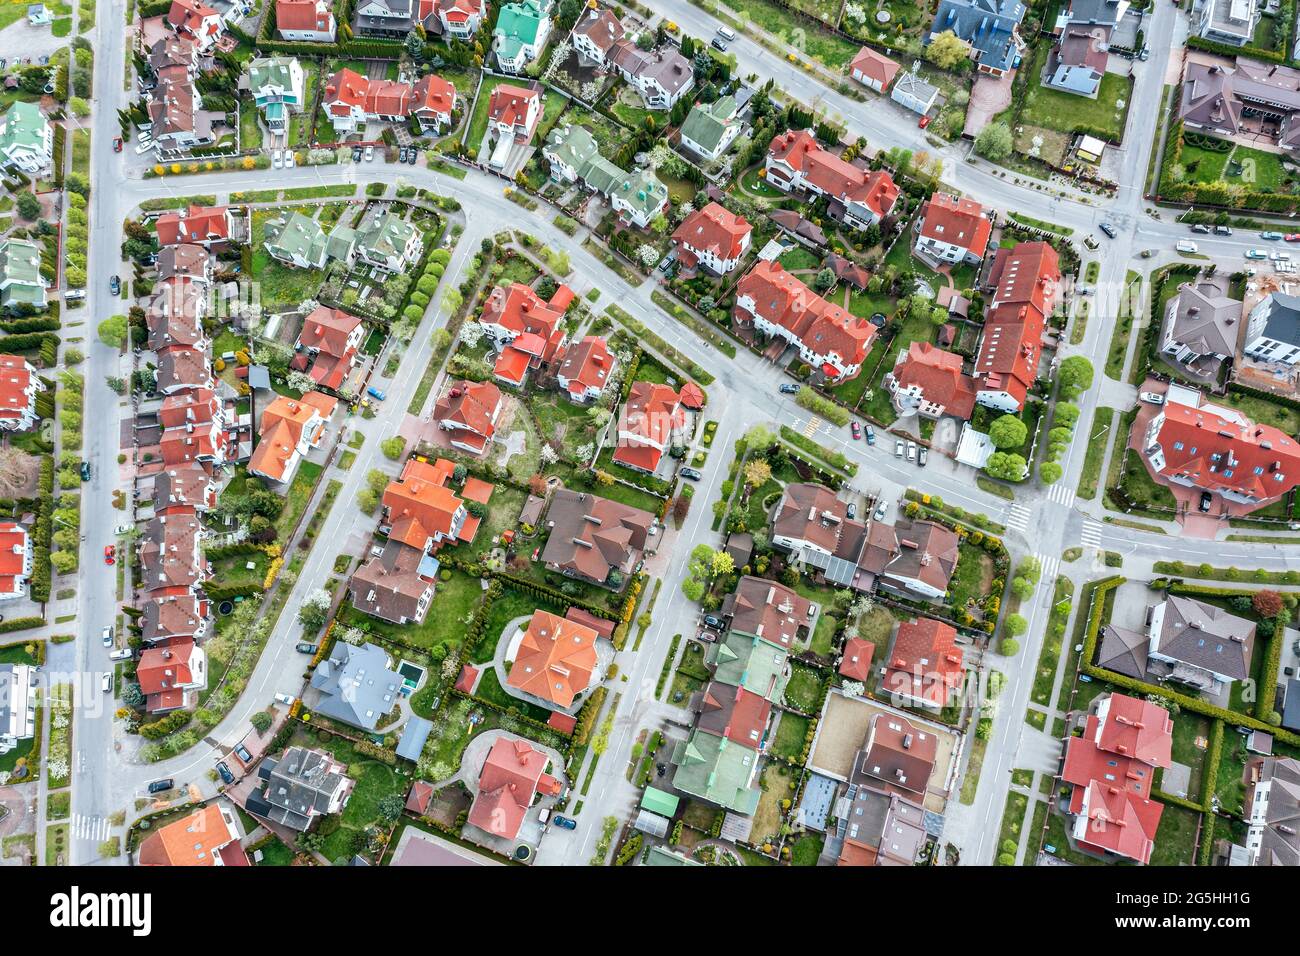 aerial top view of a neighborhood in the suburban area with homes and intersecting streets Stock Photo